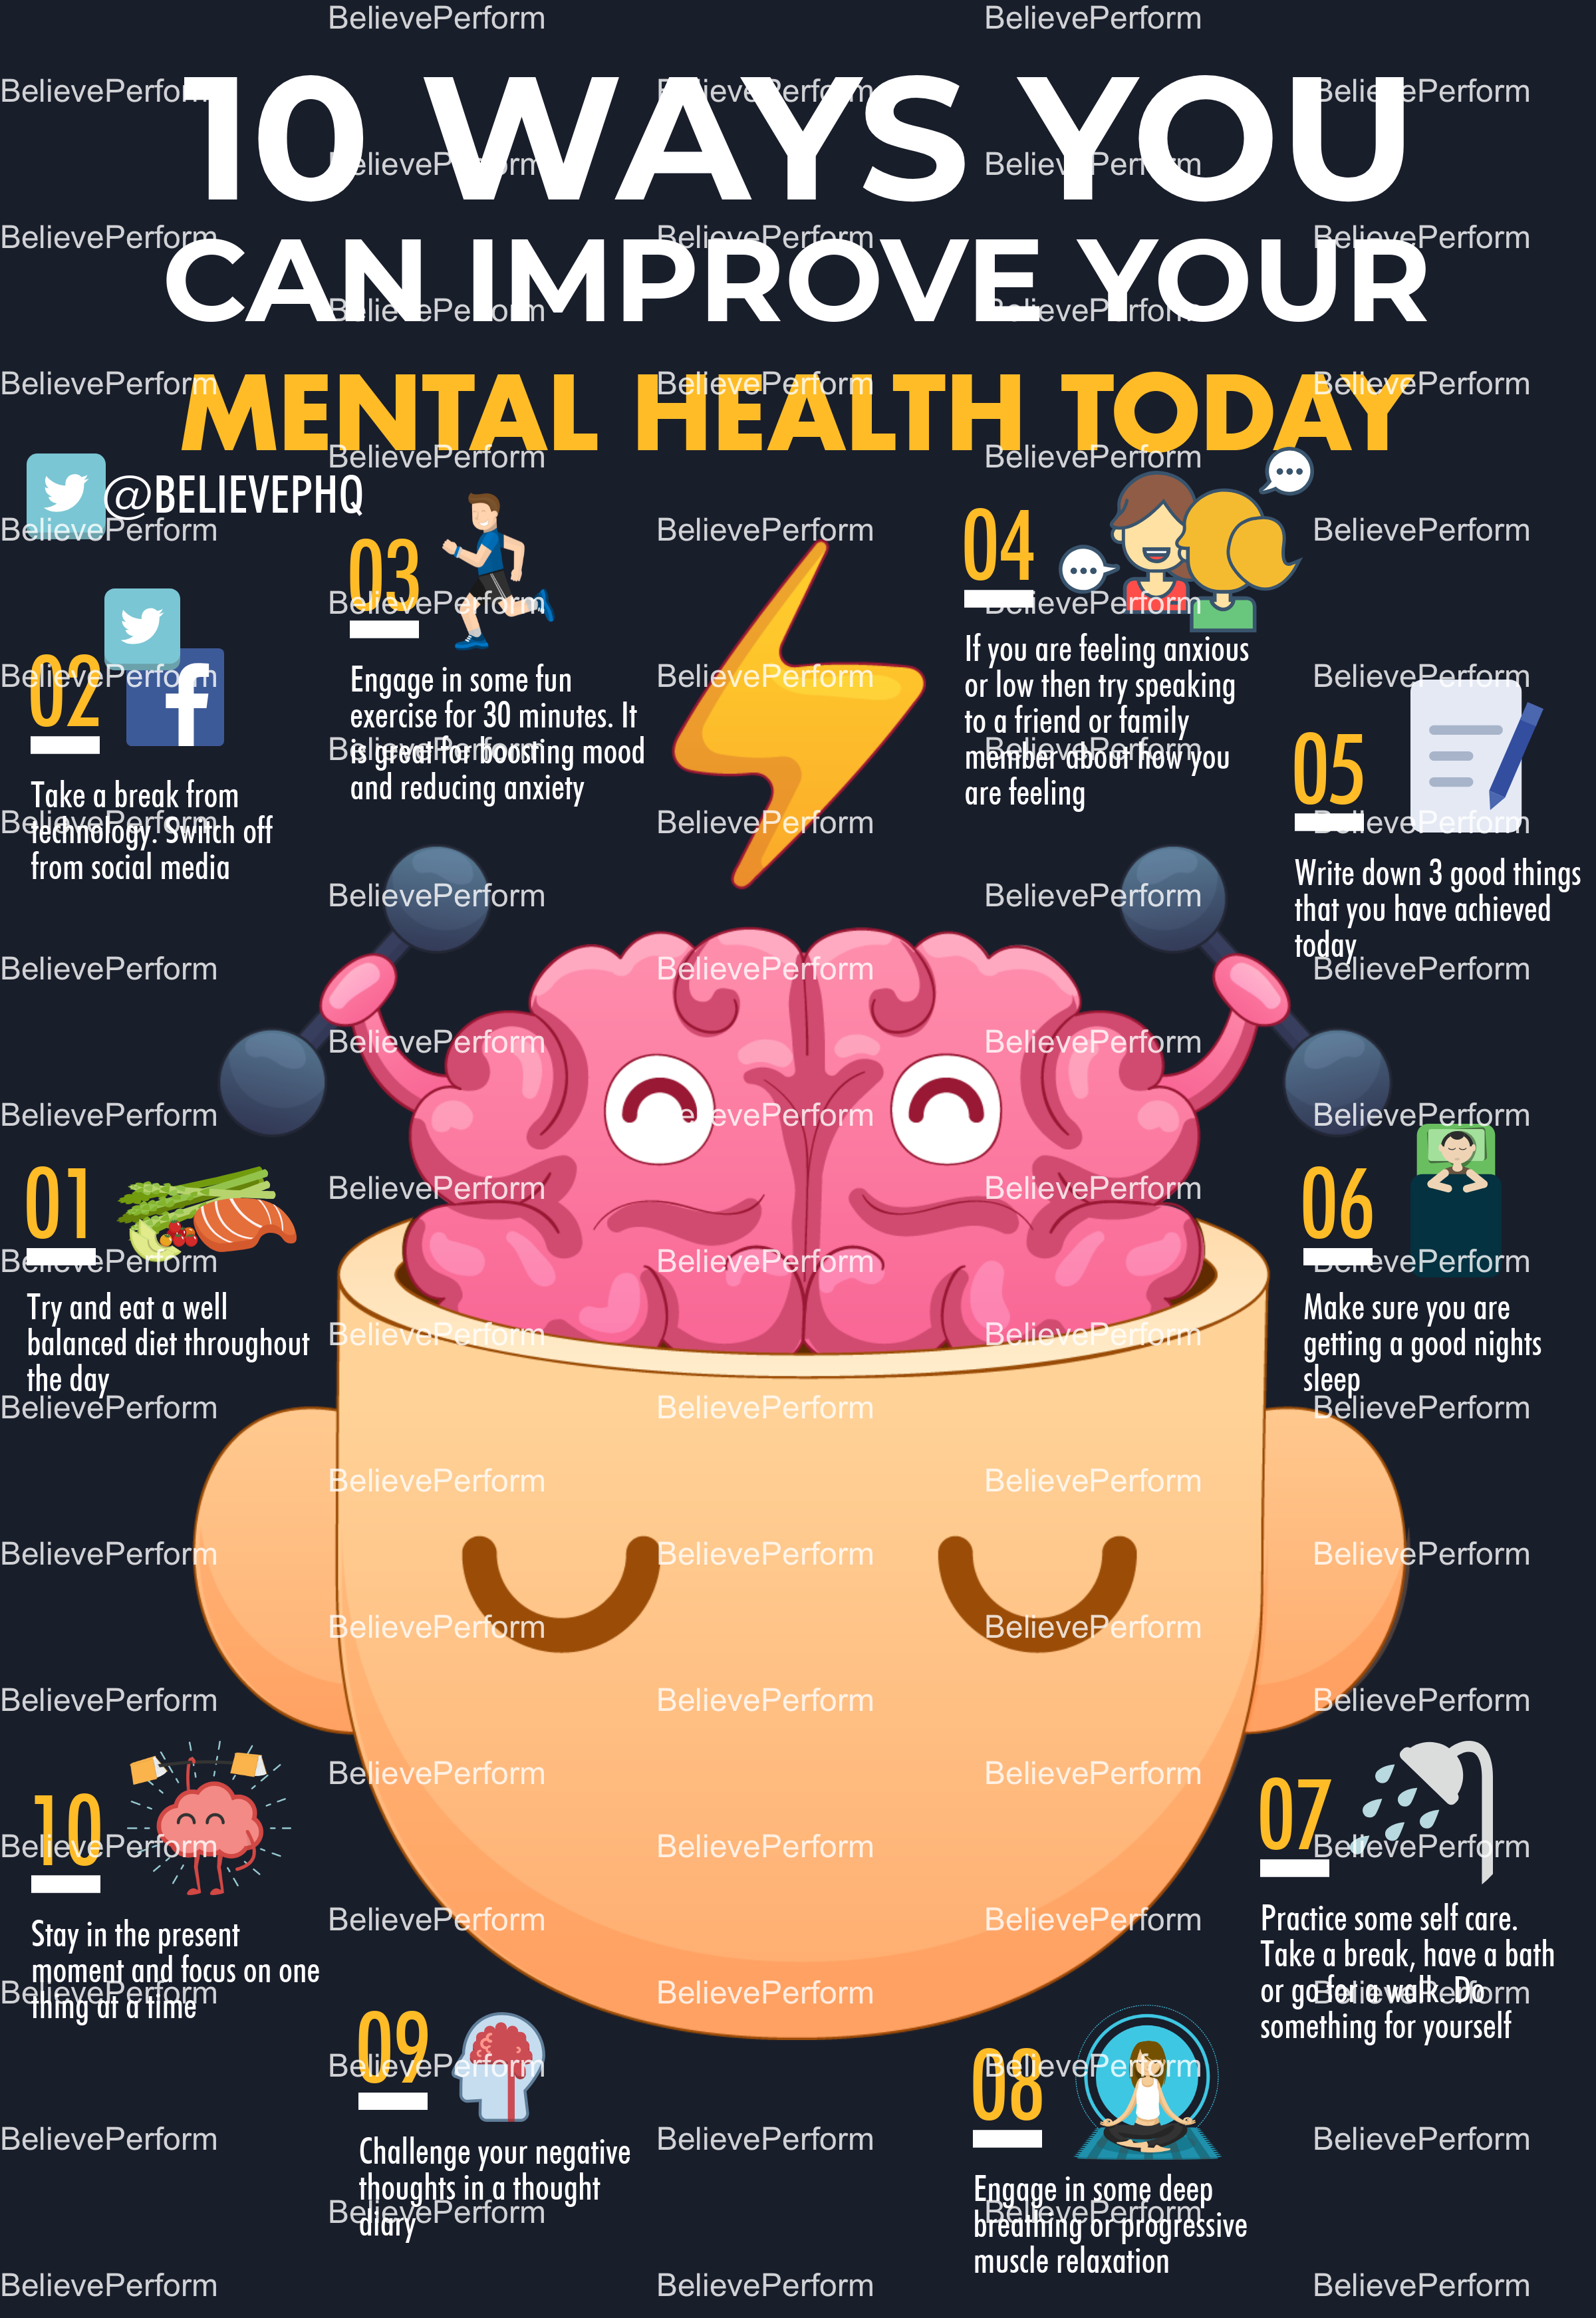 10 ways you can improve your mental health today - BelievePerform - The